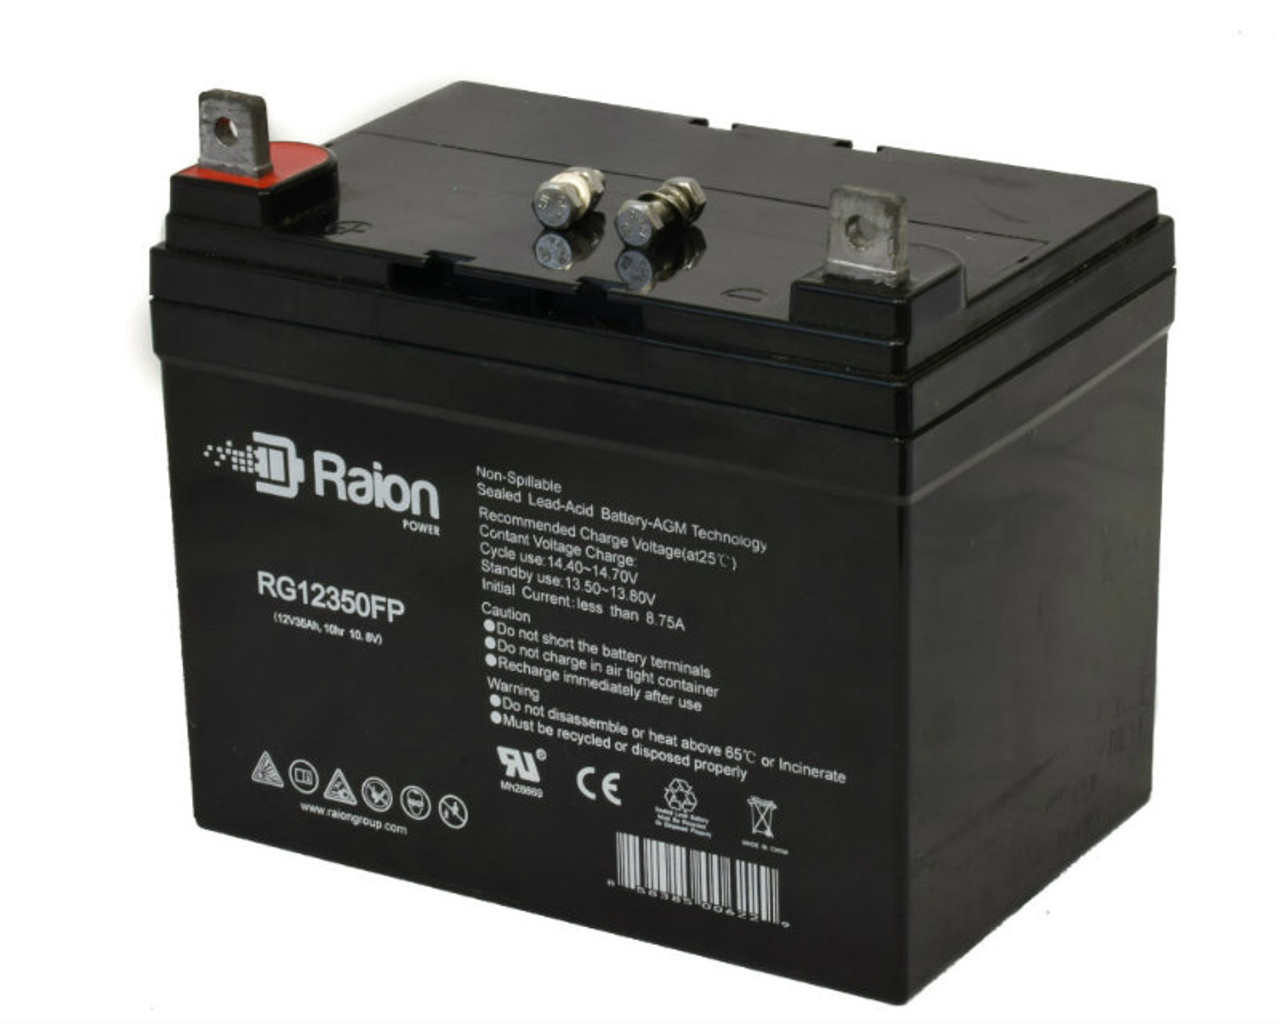 Raion Power Replacement 12V 35Ah RG12350FP Battery for Chilwee 6-FM-33